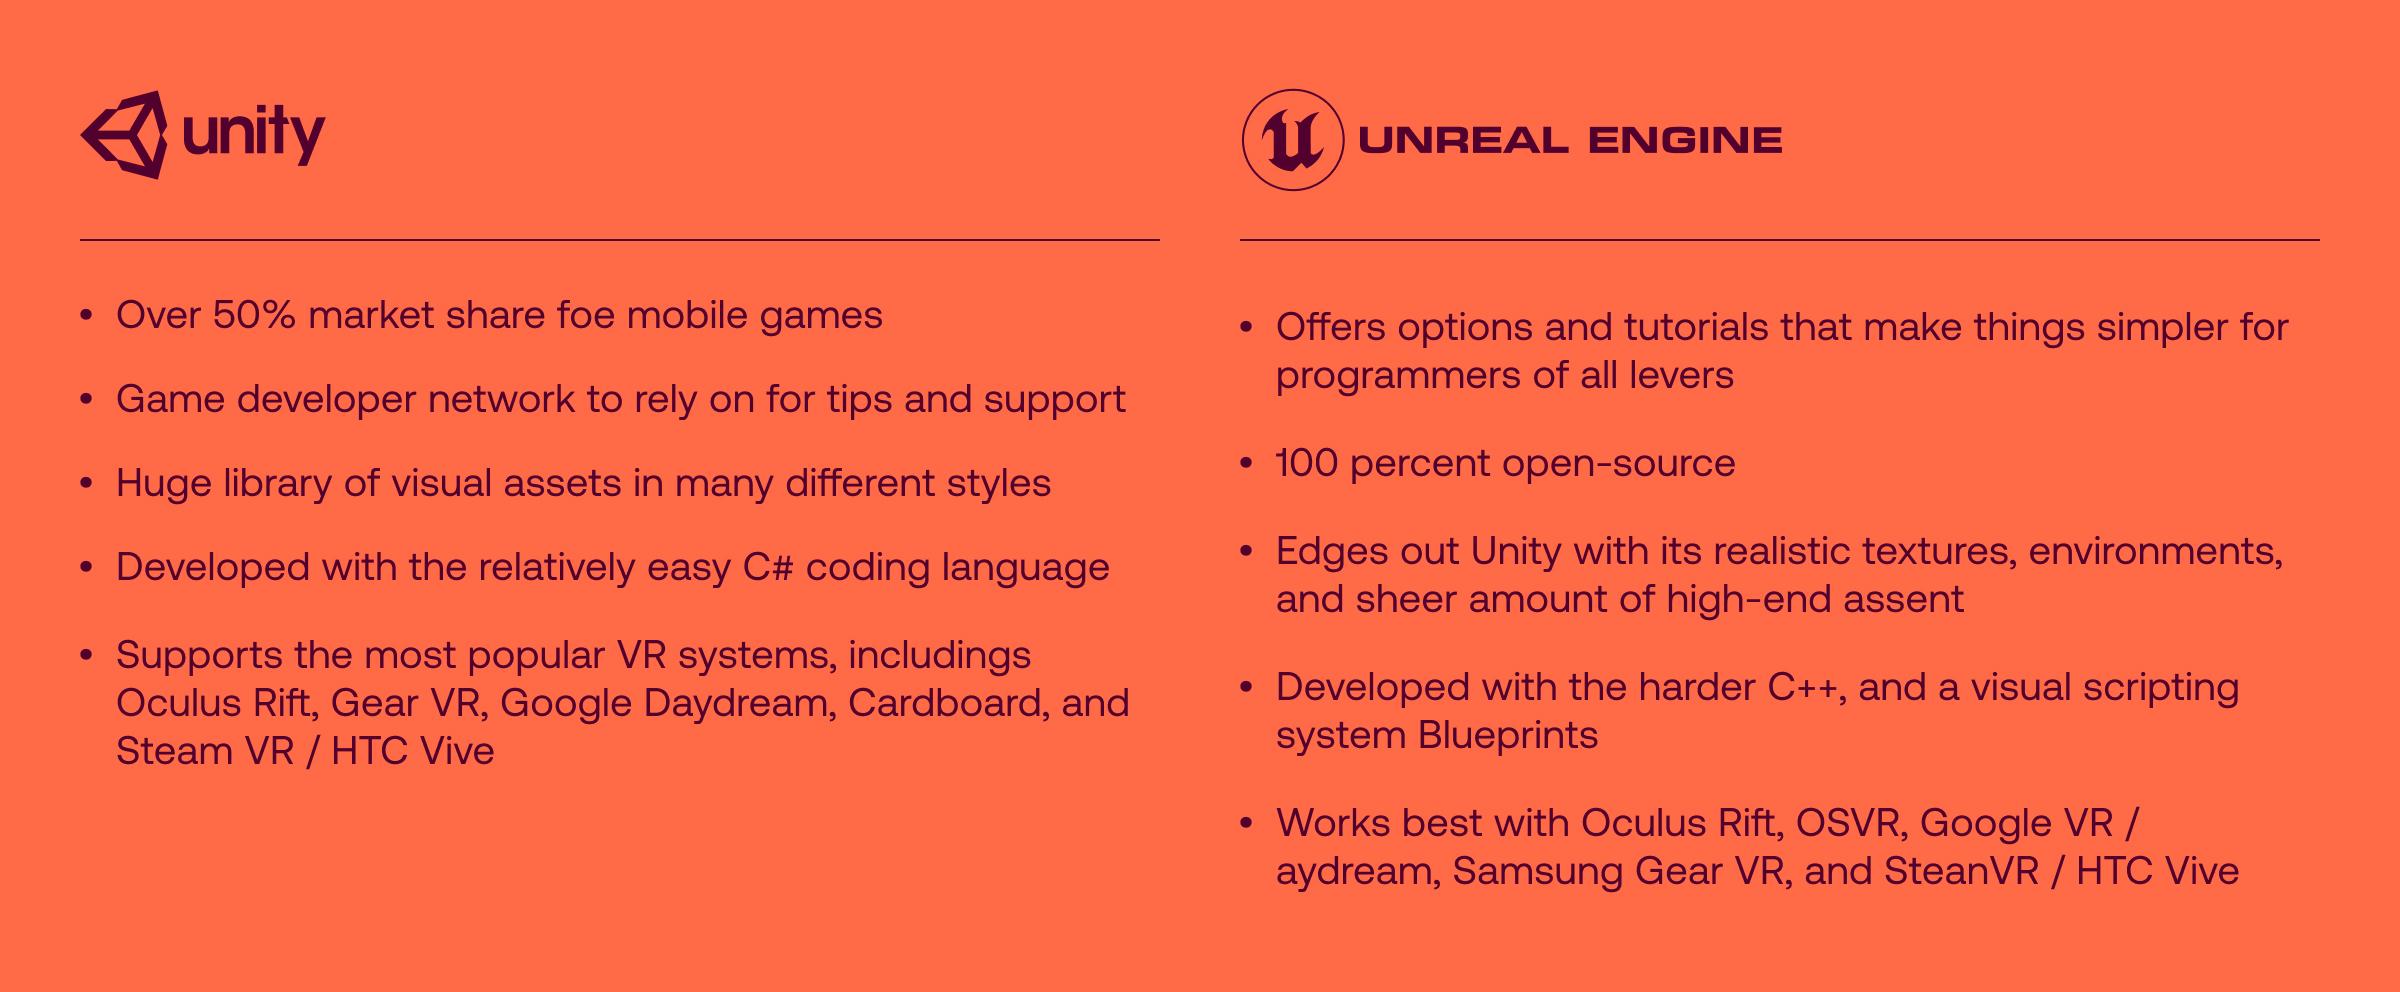 Benefits of Building Apps for Oculus Quest in Unreal Engine